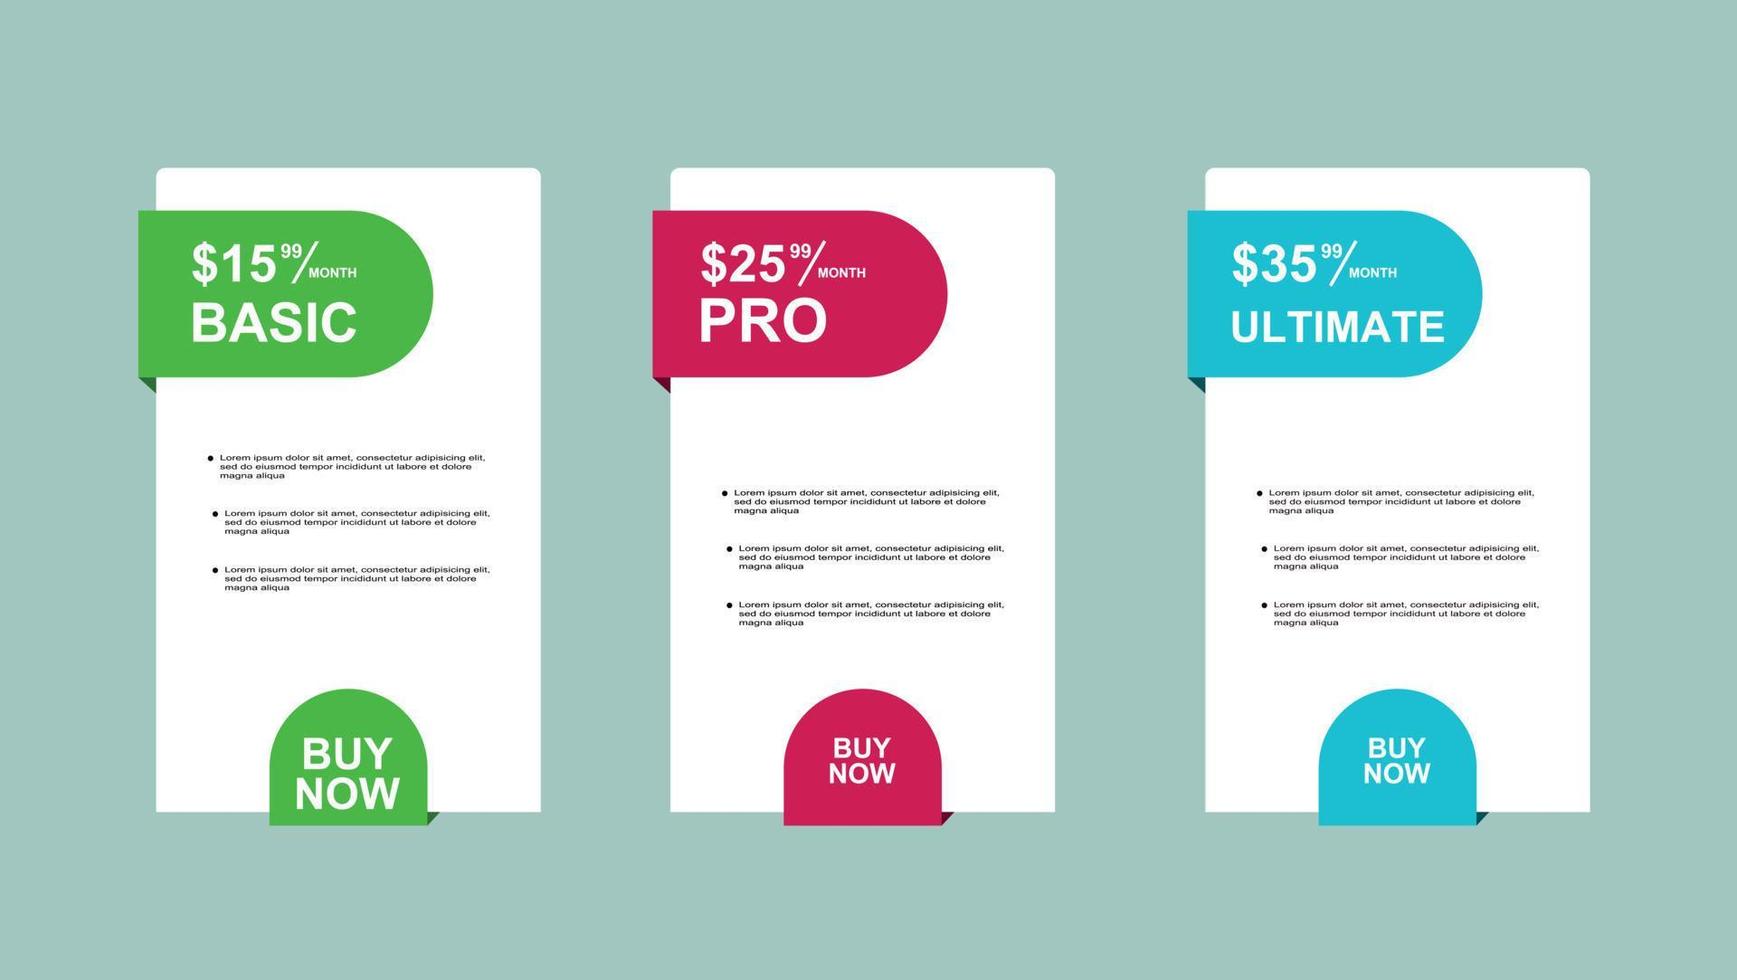 set of pricing table, order, box, button, list for web vector